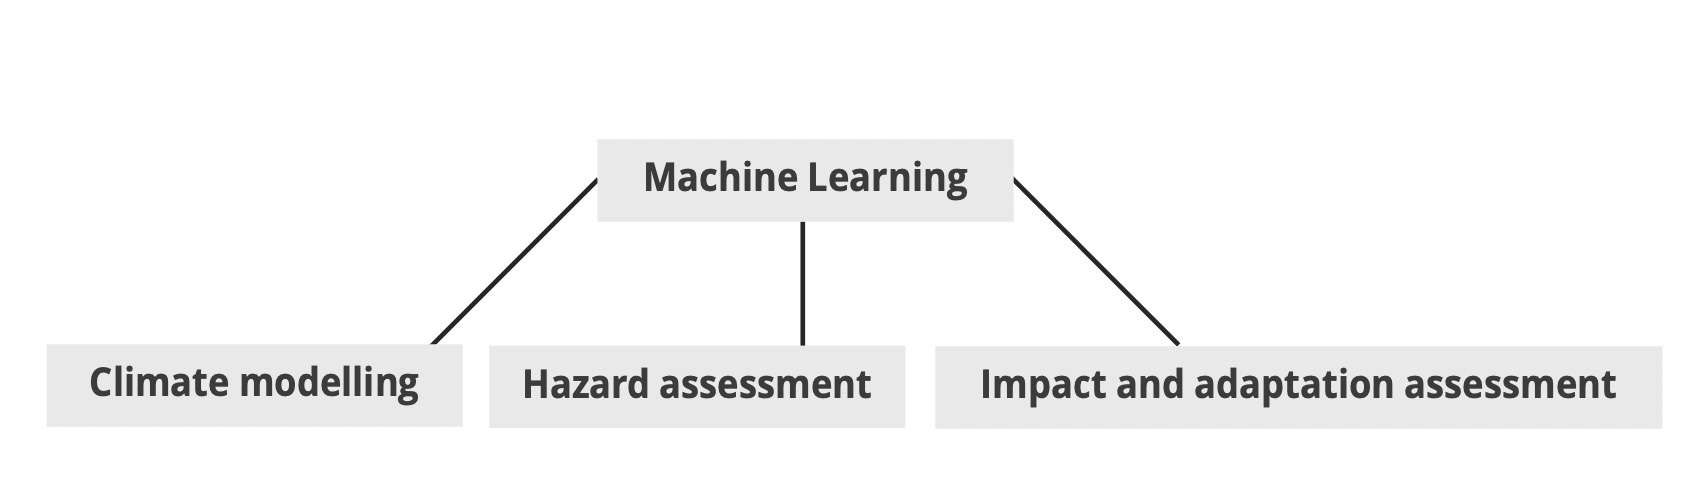 A diagram showing the applications of Machine Learning for climate change research and service development